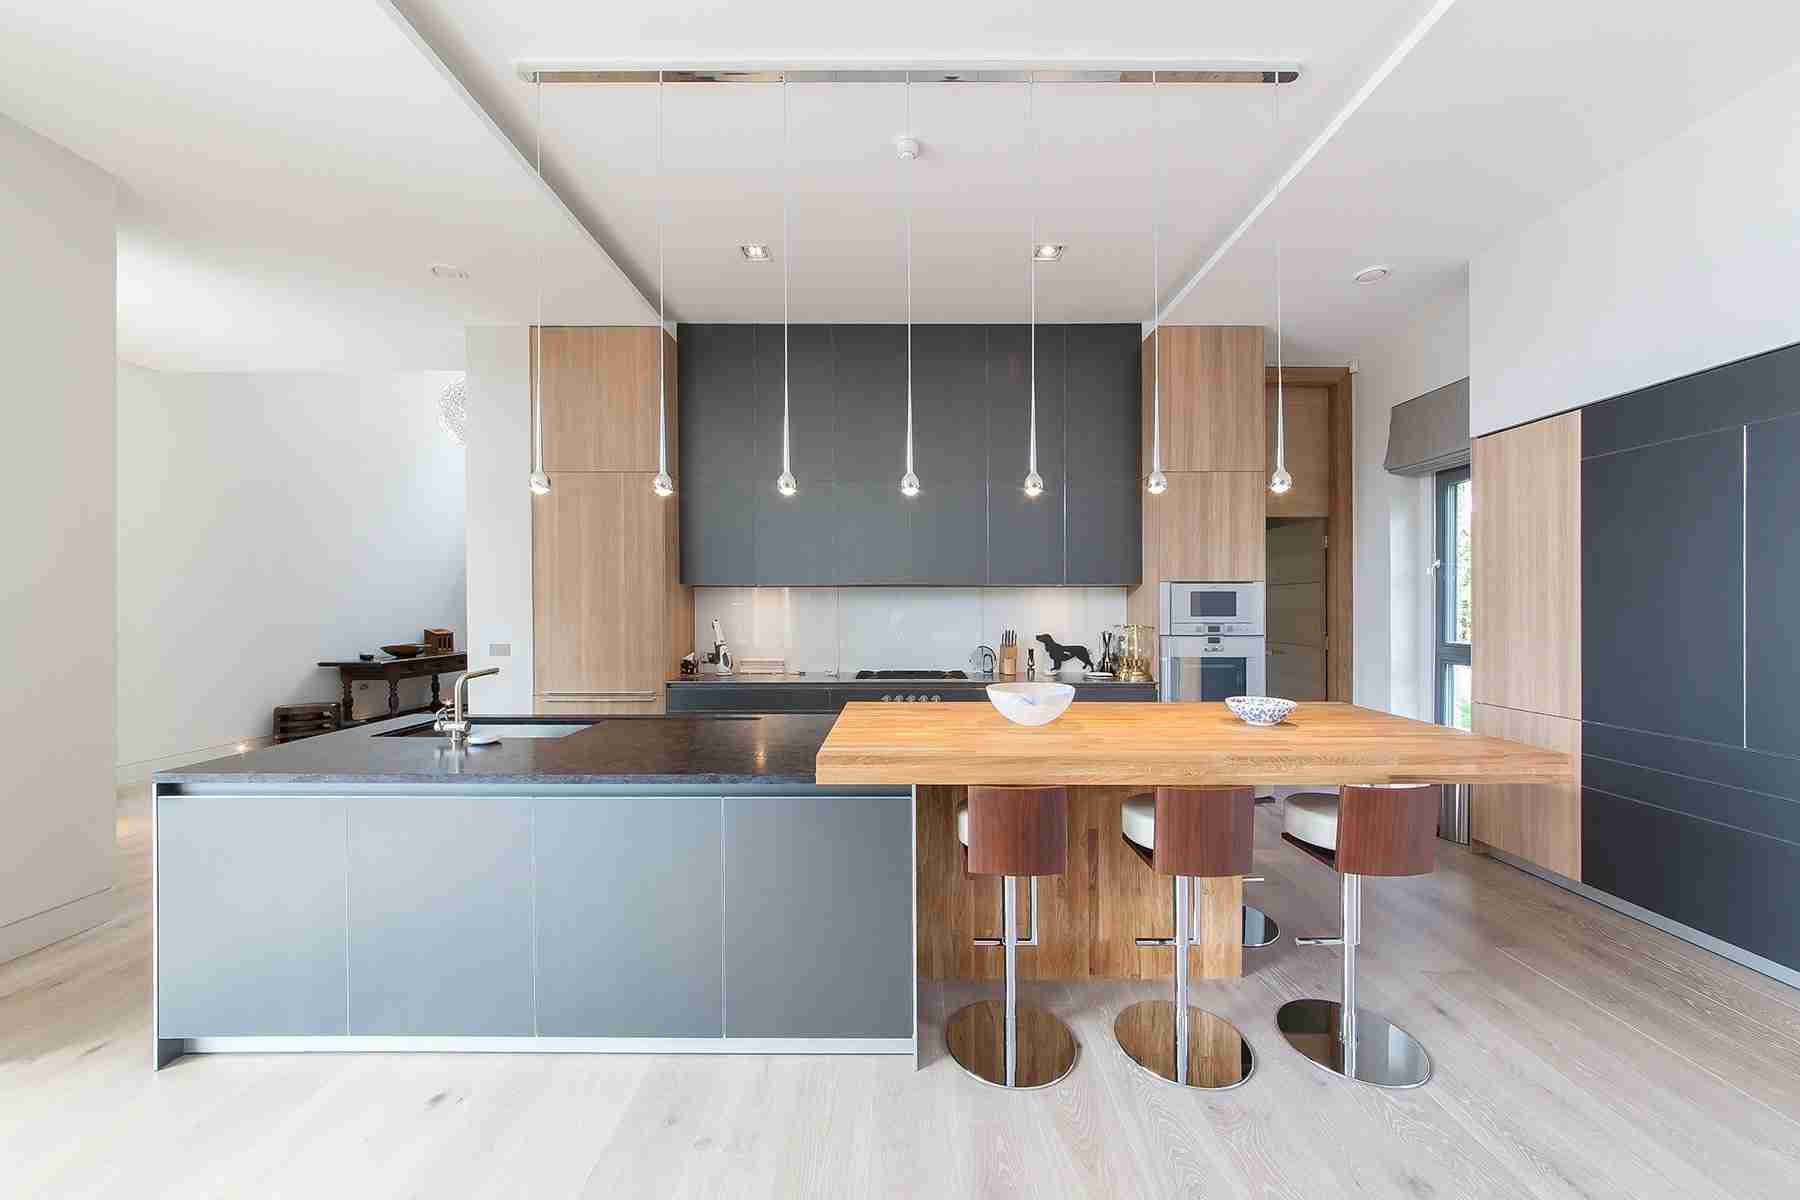 Solid Wood Kitchen Stylish Ideas for Modern Interiors. Modern interior design with noble light wooden inlays